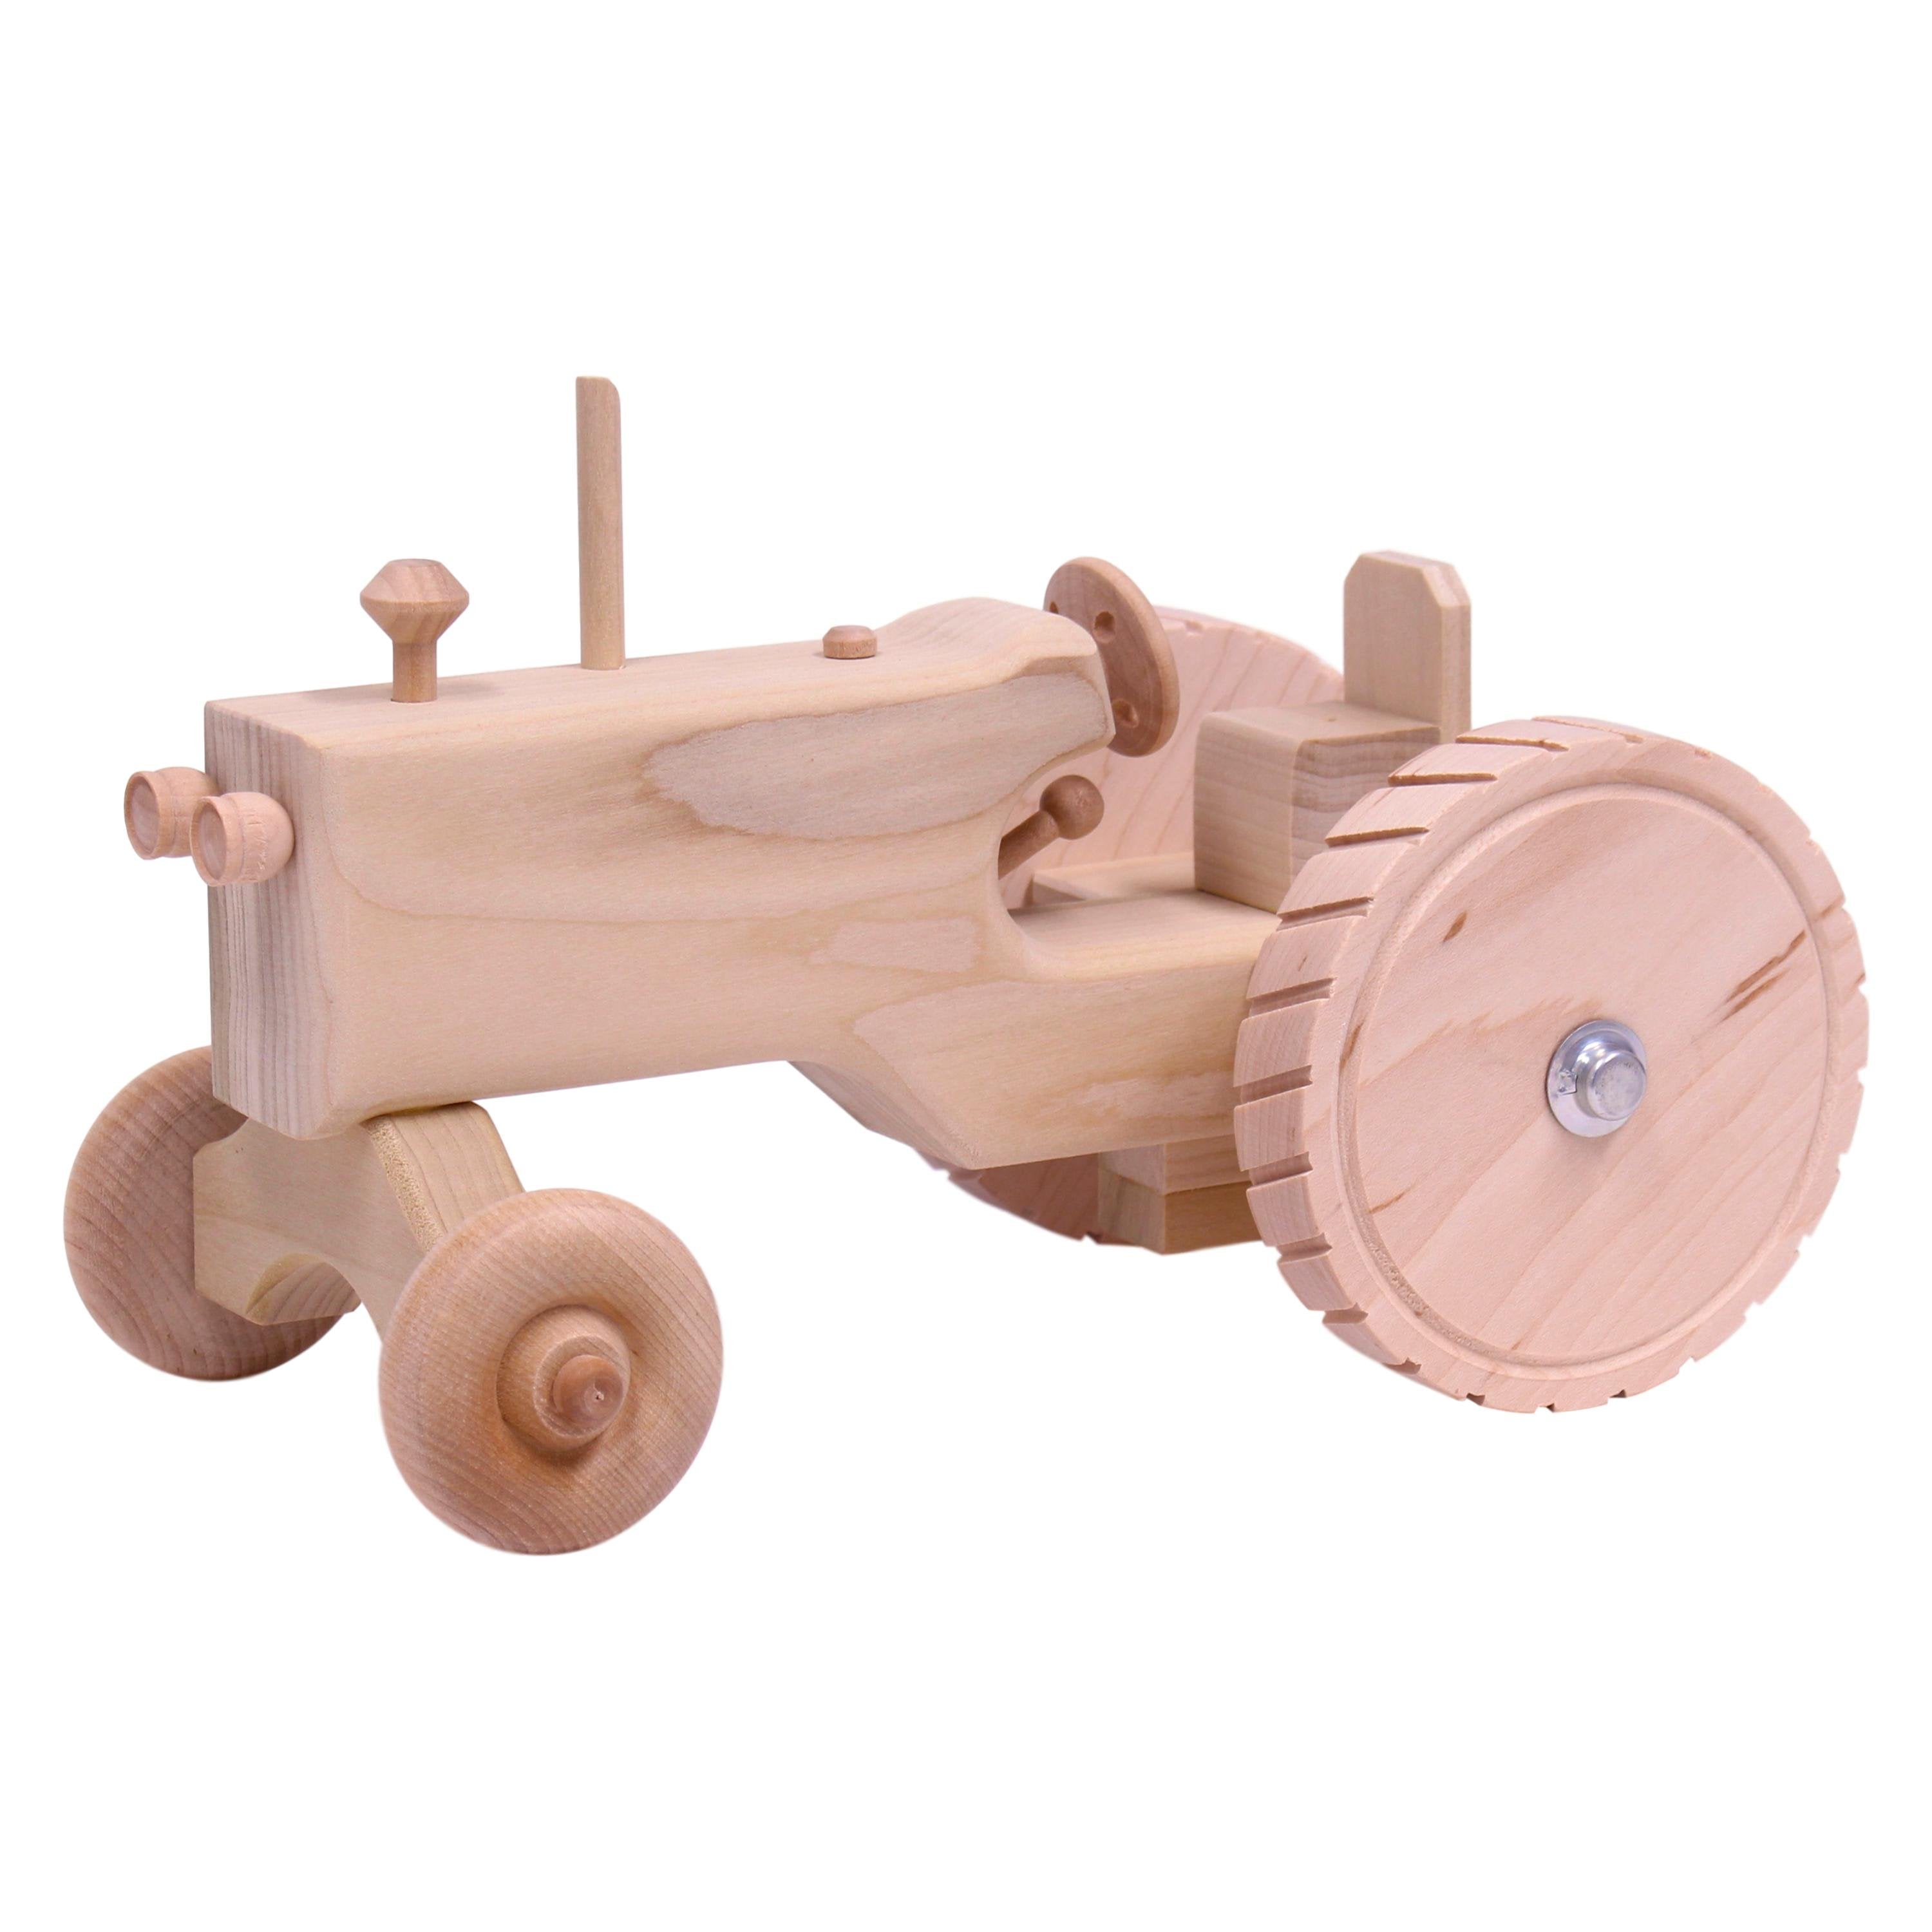 Amish Made Wooden Tractor Toy